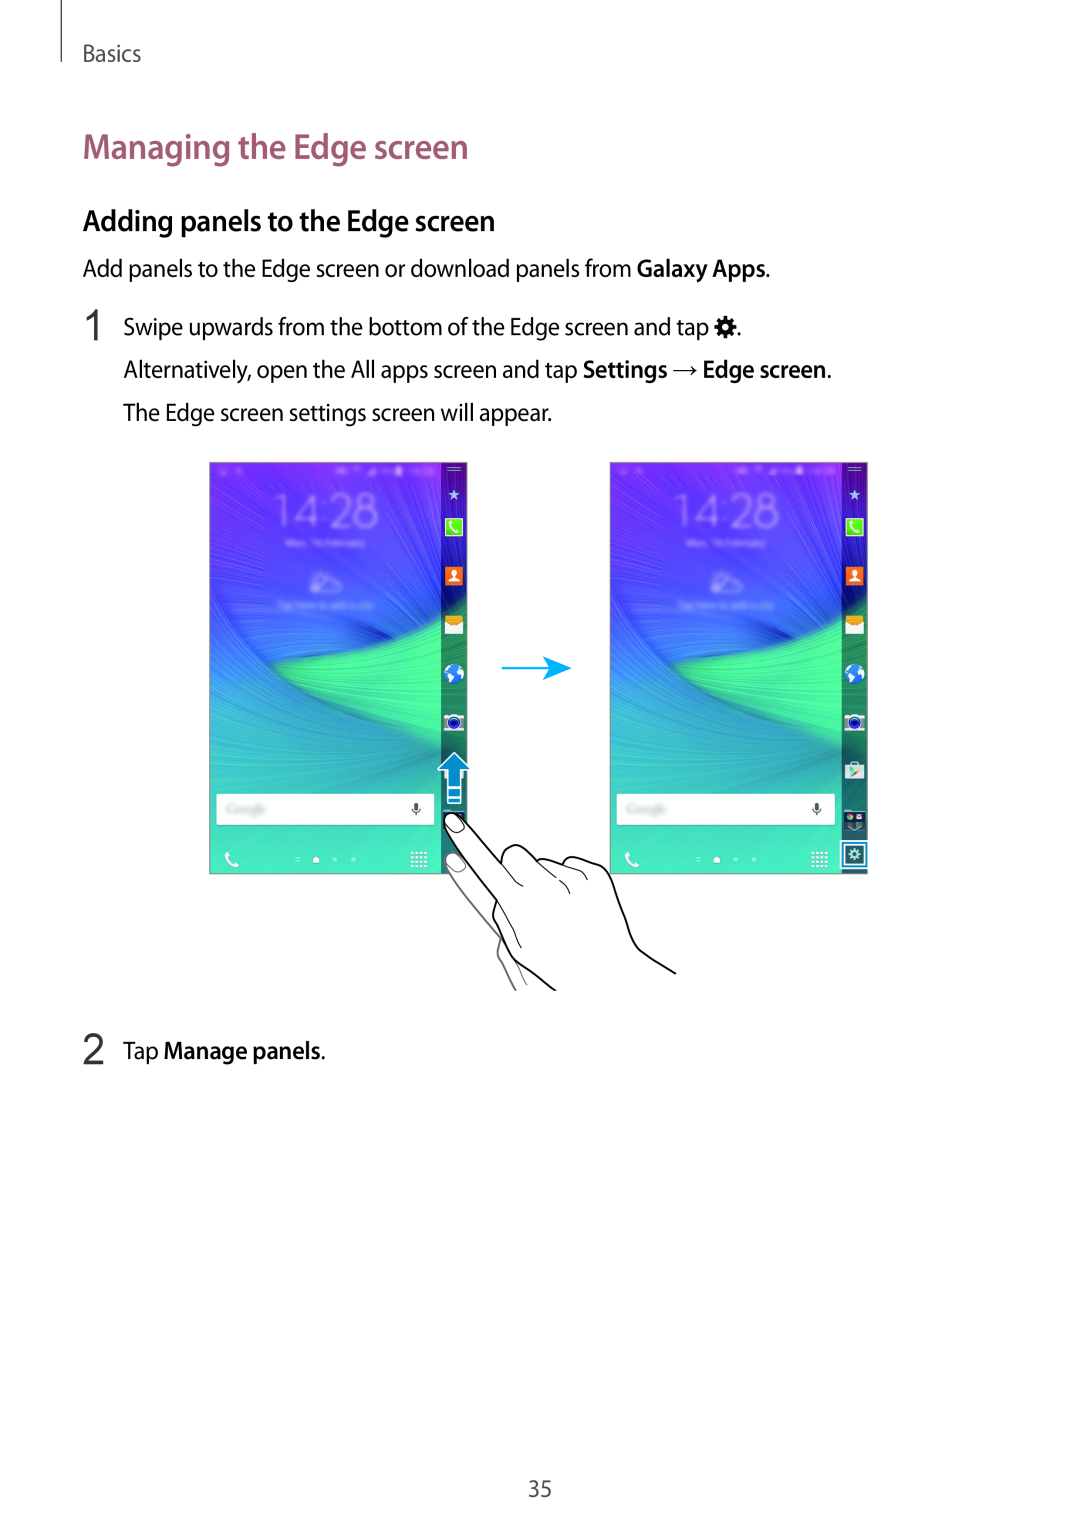 Samsung SM-N915FZWYXEO manual Managing the Edge screen, Adding panels to the Edge screen, Tap Manage panels, Basics 